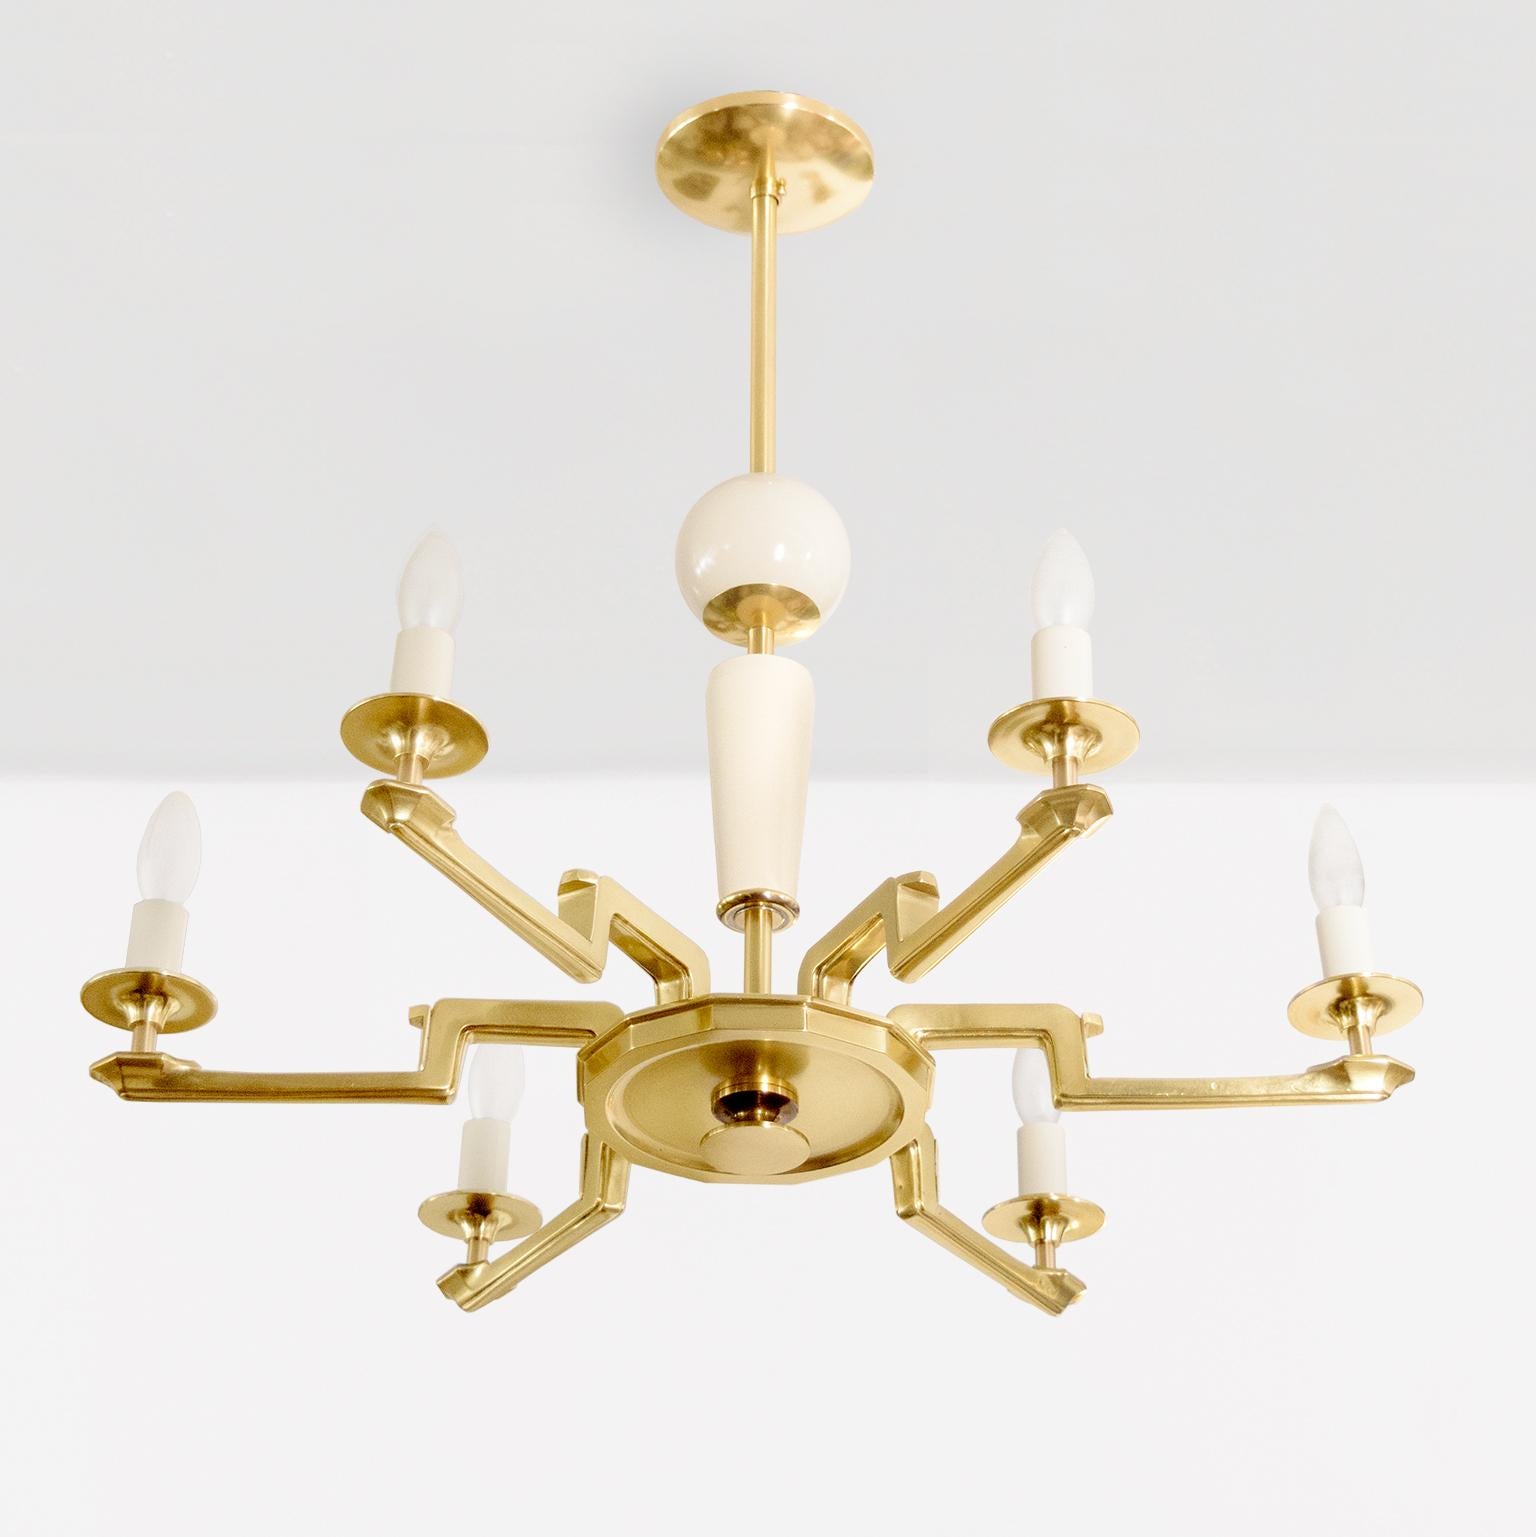 Swedish Art Deco 6-arm chandelier with details in ivory colored lacquer emanating from a hexagonal center body. Each finely detail arm meanders outwards to a candelabra socket. The candle sleeves are ivory colored lacquer matching the solid wood